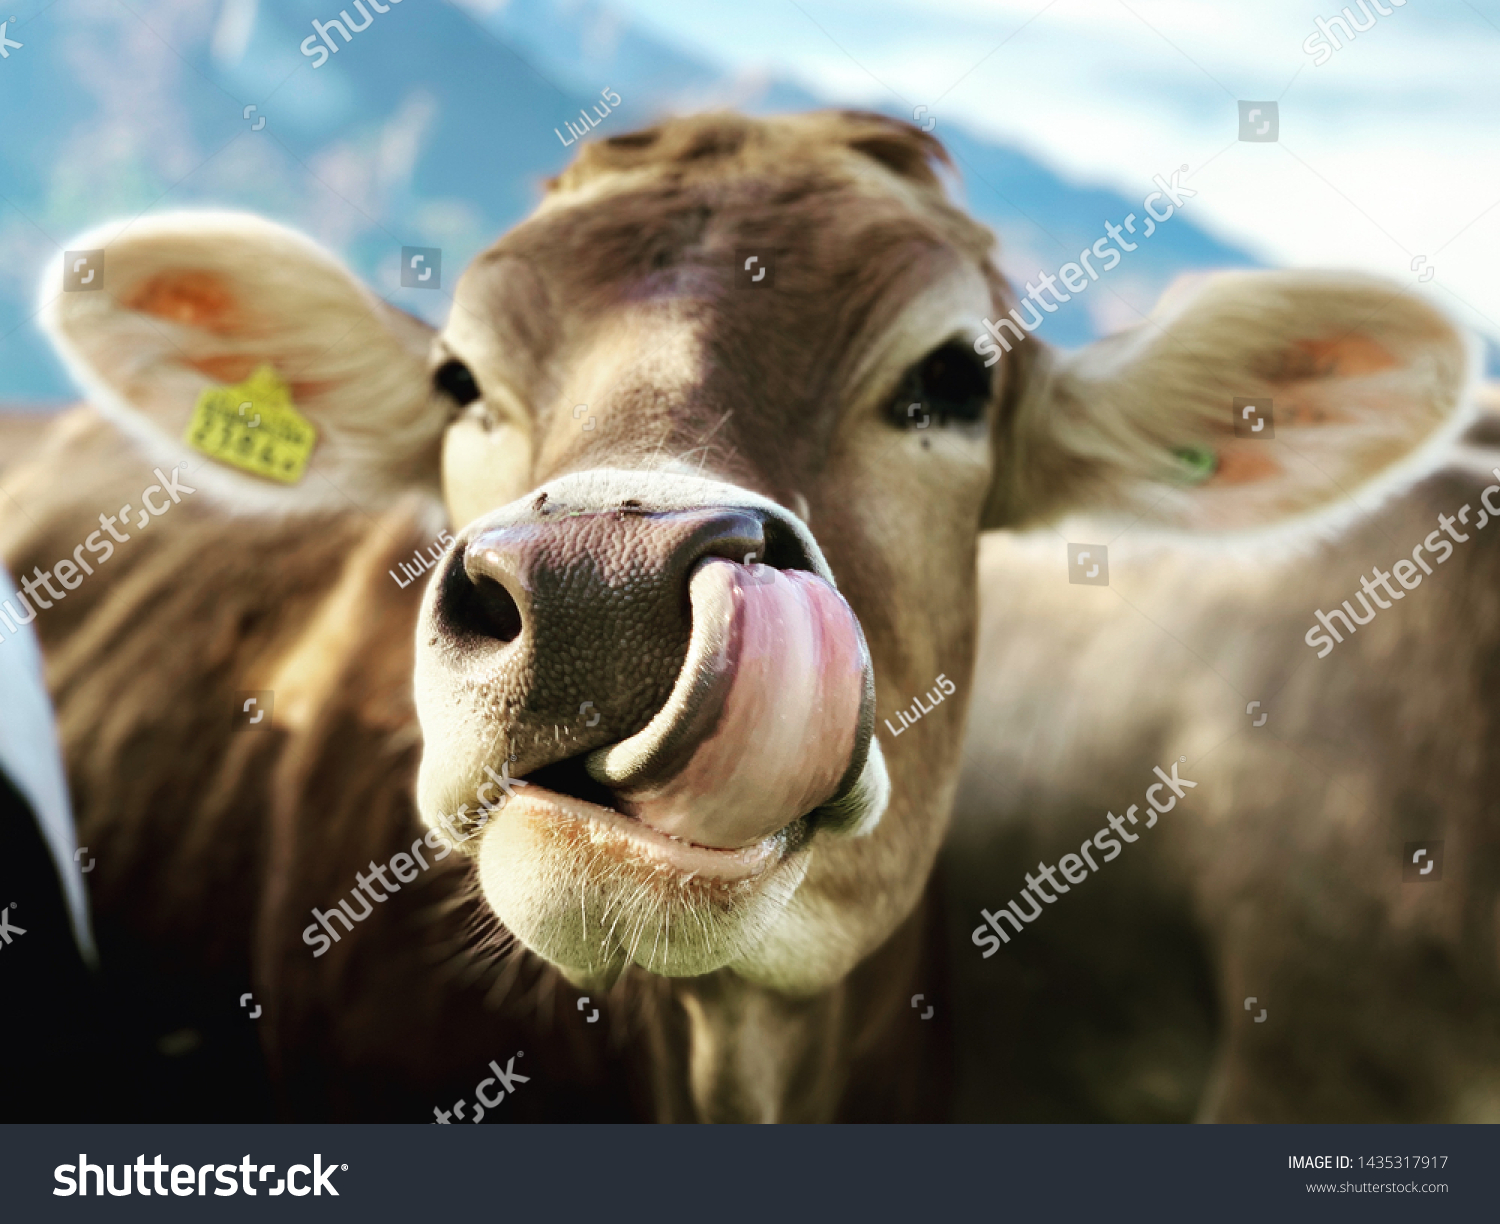 Cow Has Her Tongue Her Nose Stock Photo 1435317917 ...